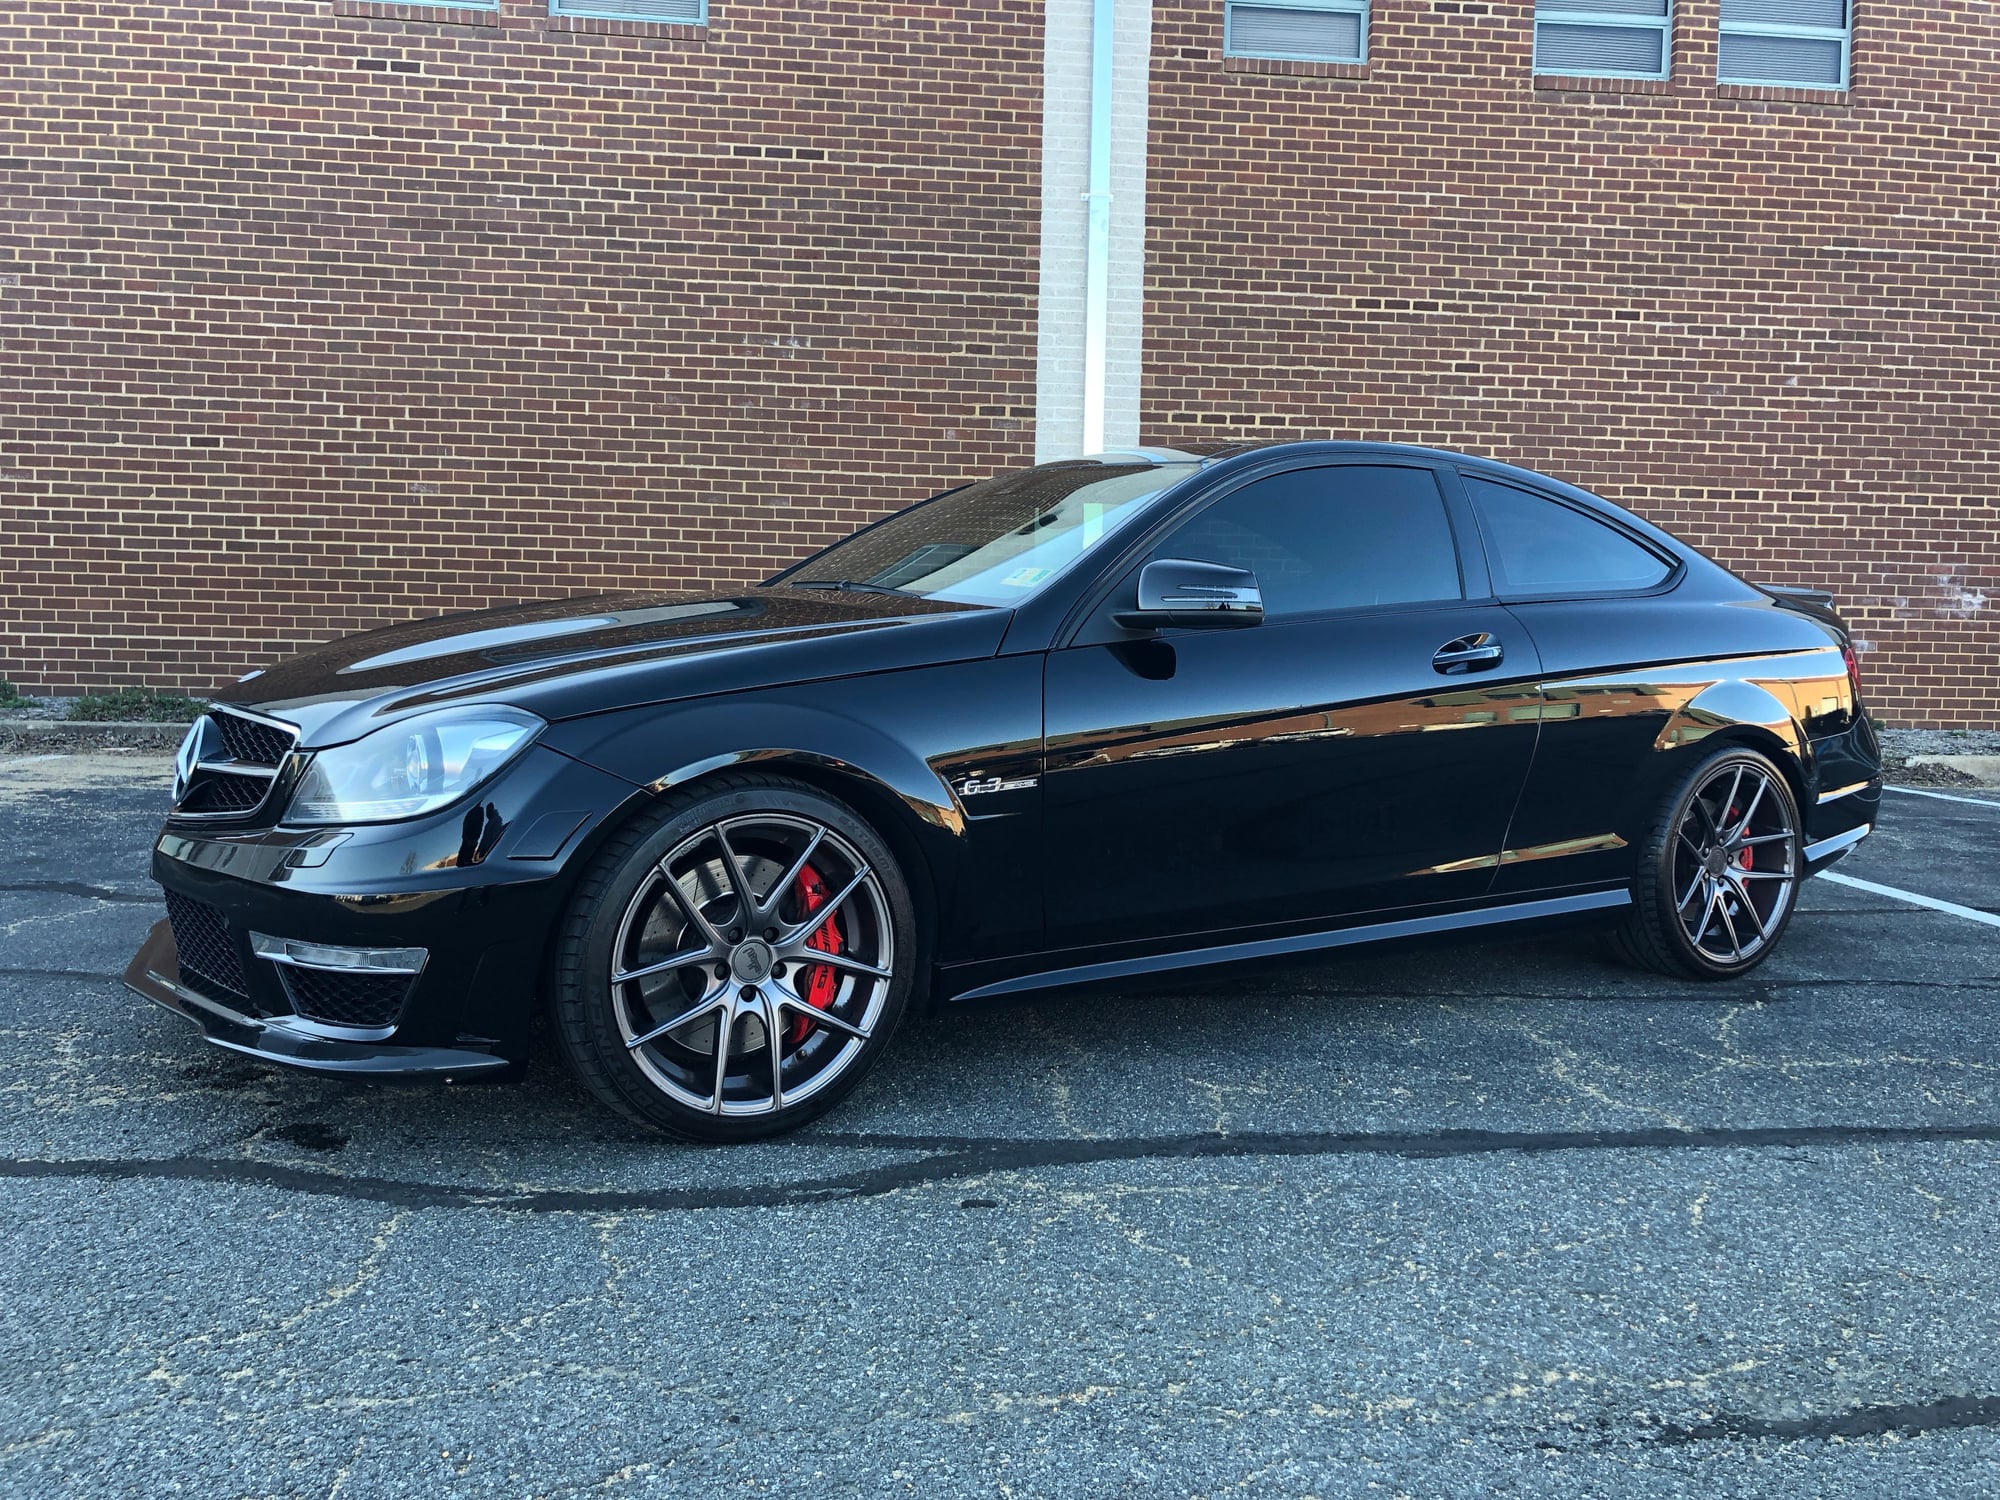 2012 Mercedes-Benz C63 AMG - 2012 Mercedes C63 AMG Coupe - Used - VIN WDDGJ7HB1CF811579 - 77,000 Miles - 8 cyl - 2WD - Automatic - Coupe - Black - Alexandria, VA 22310, United States